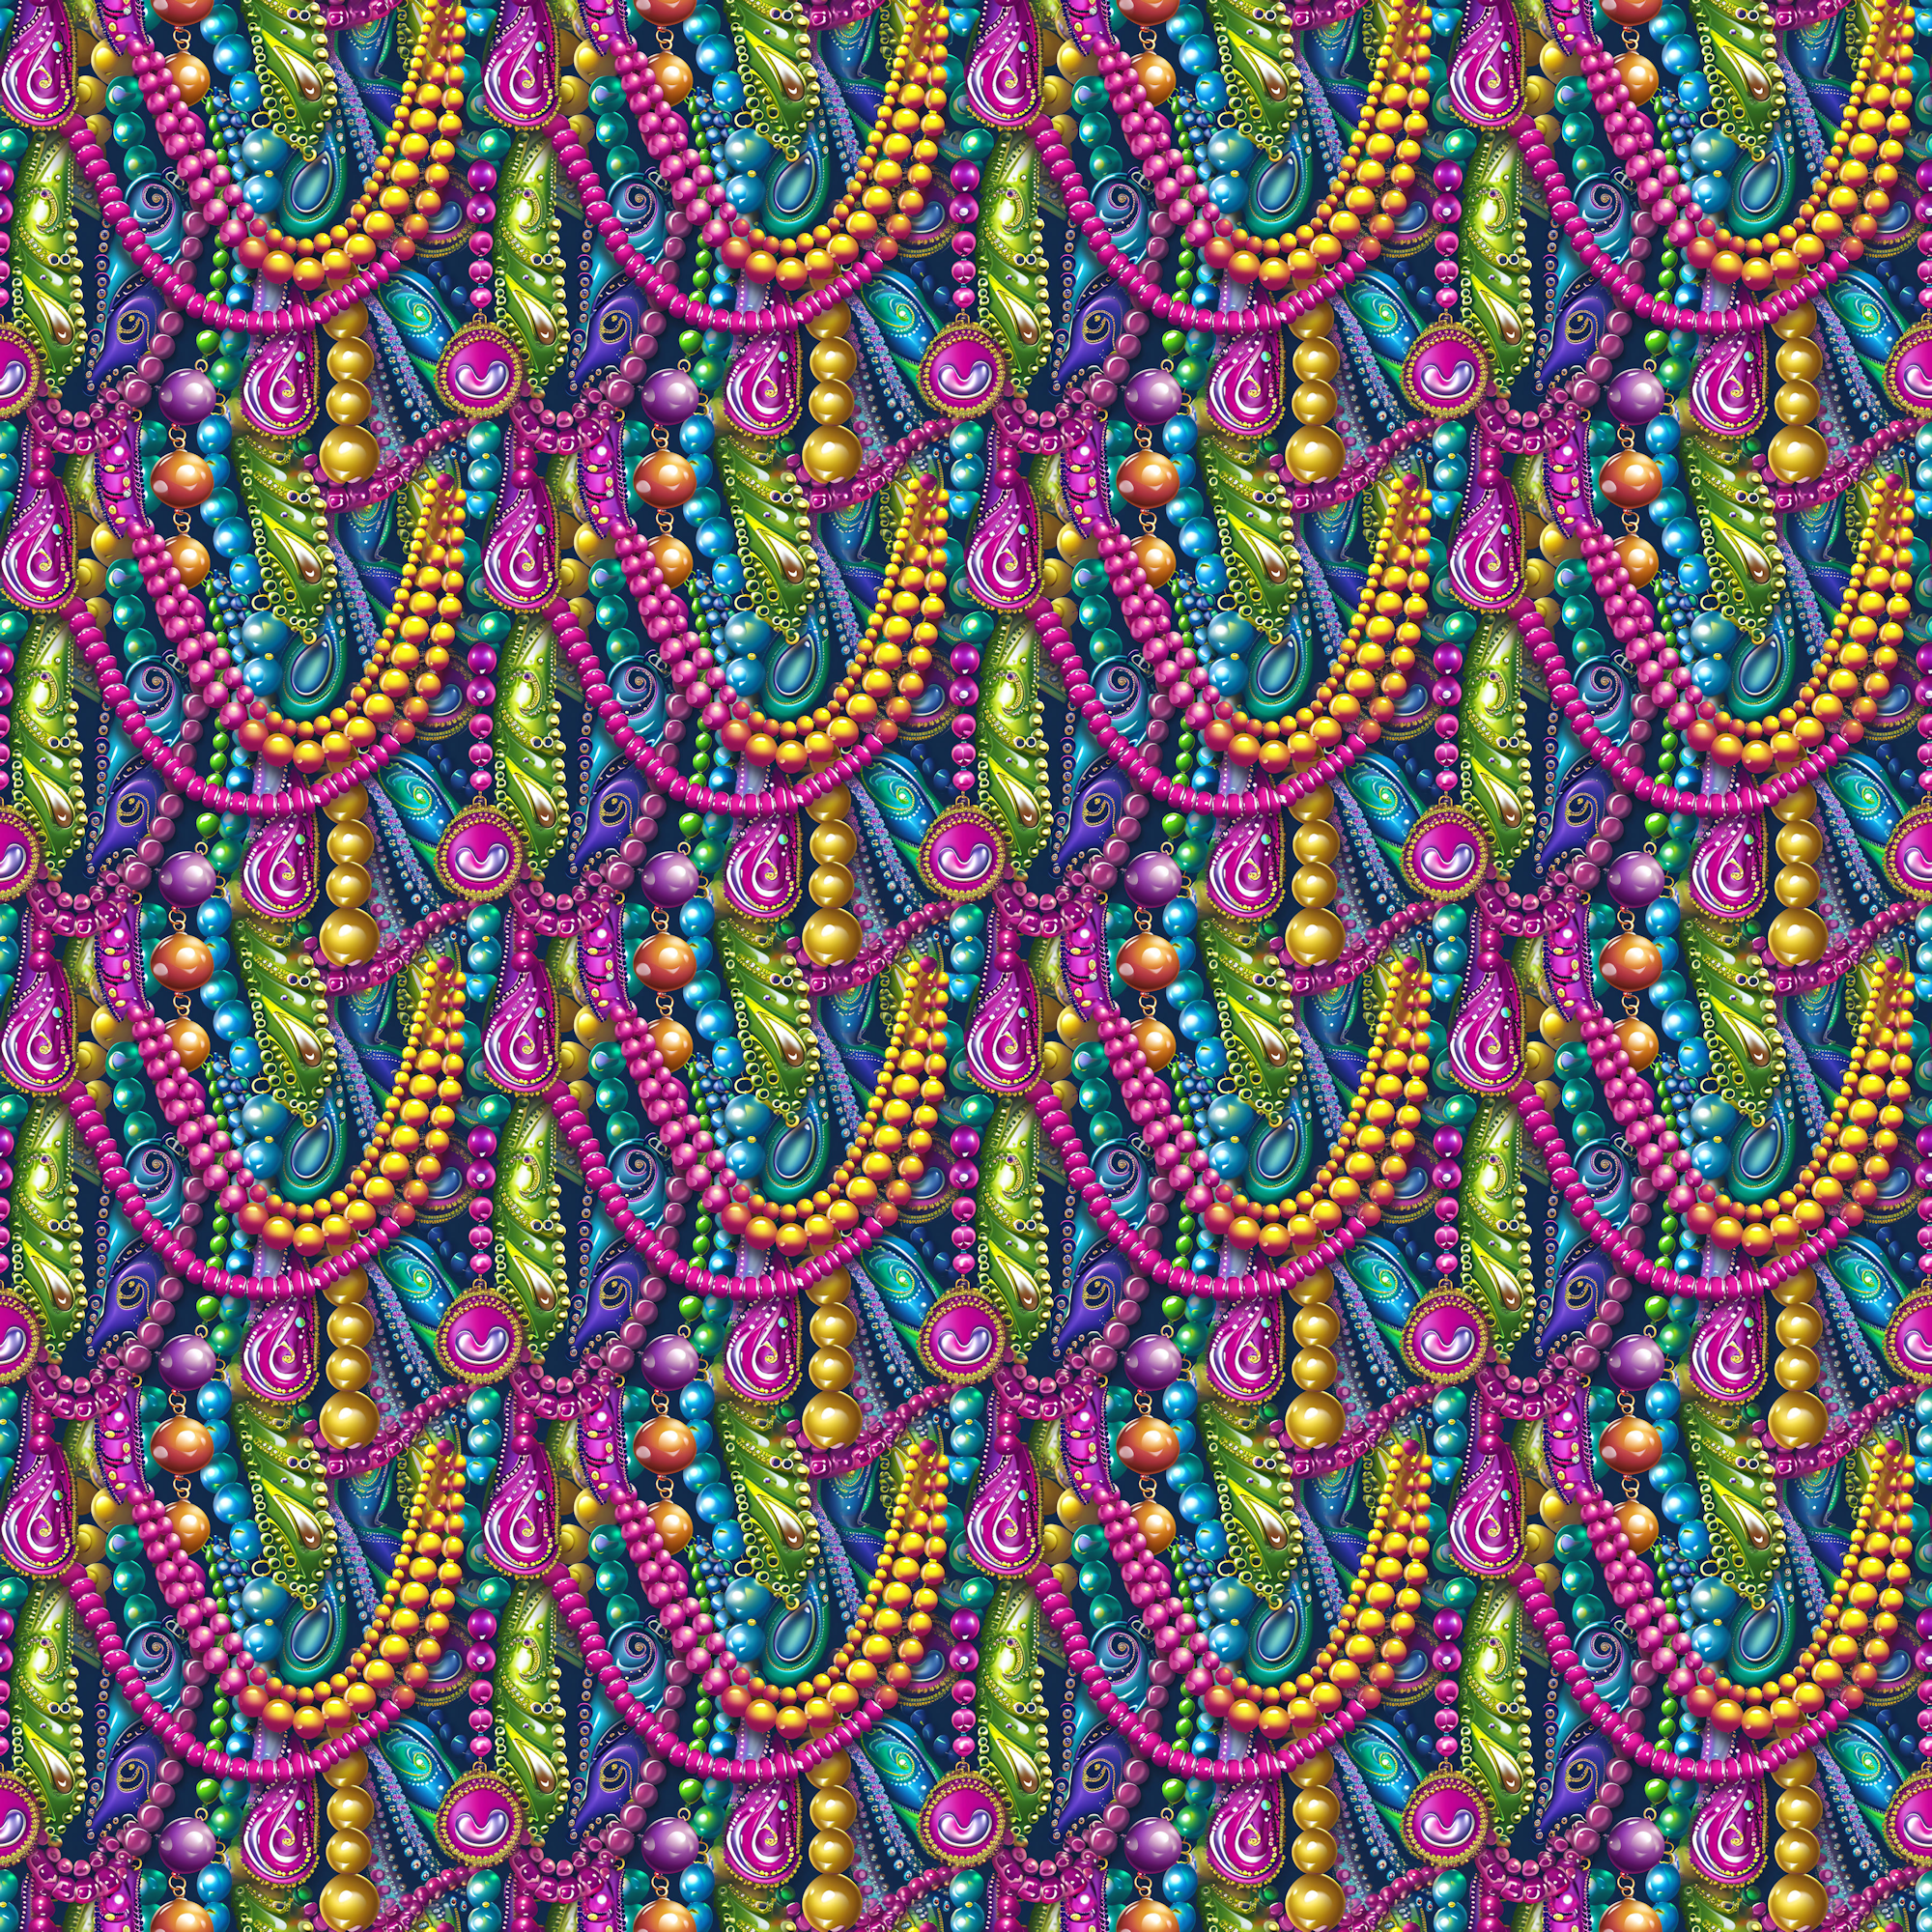 Mardi Gras Party Collection Jester 12 x 12 Double-Sided Scrapbook Paper by SSC Designs